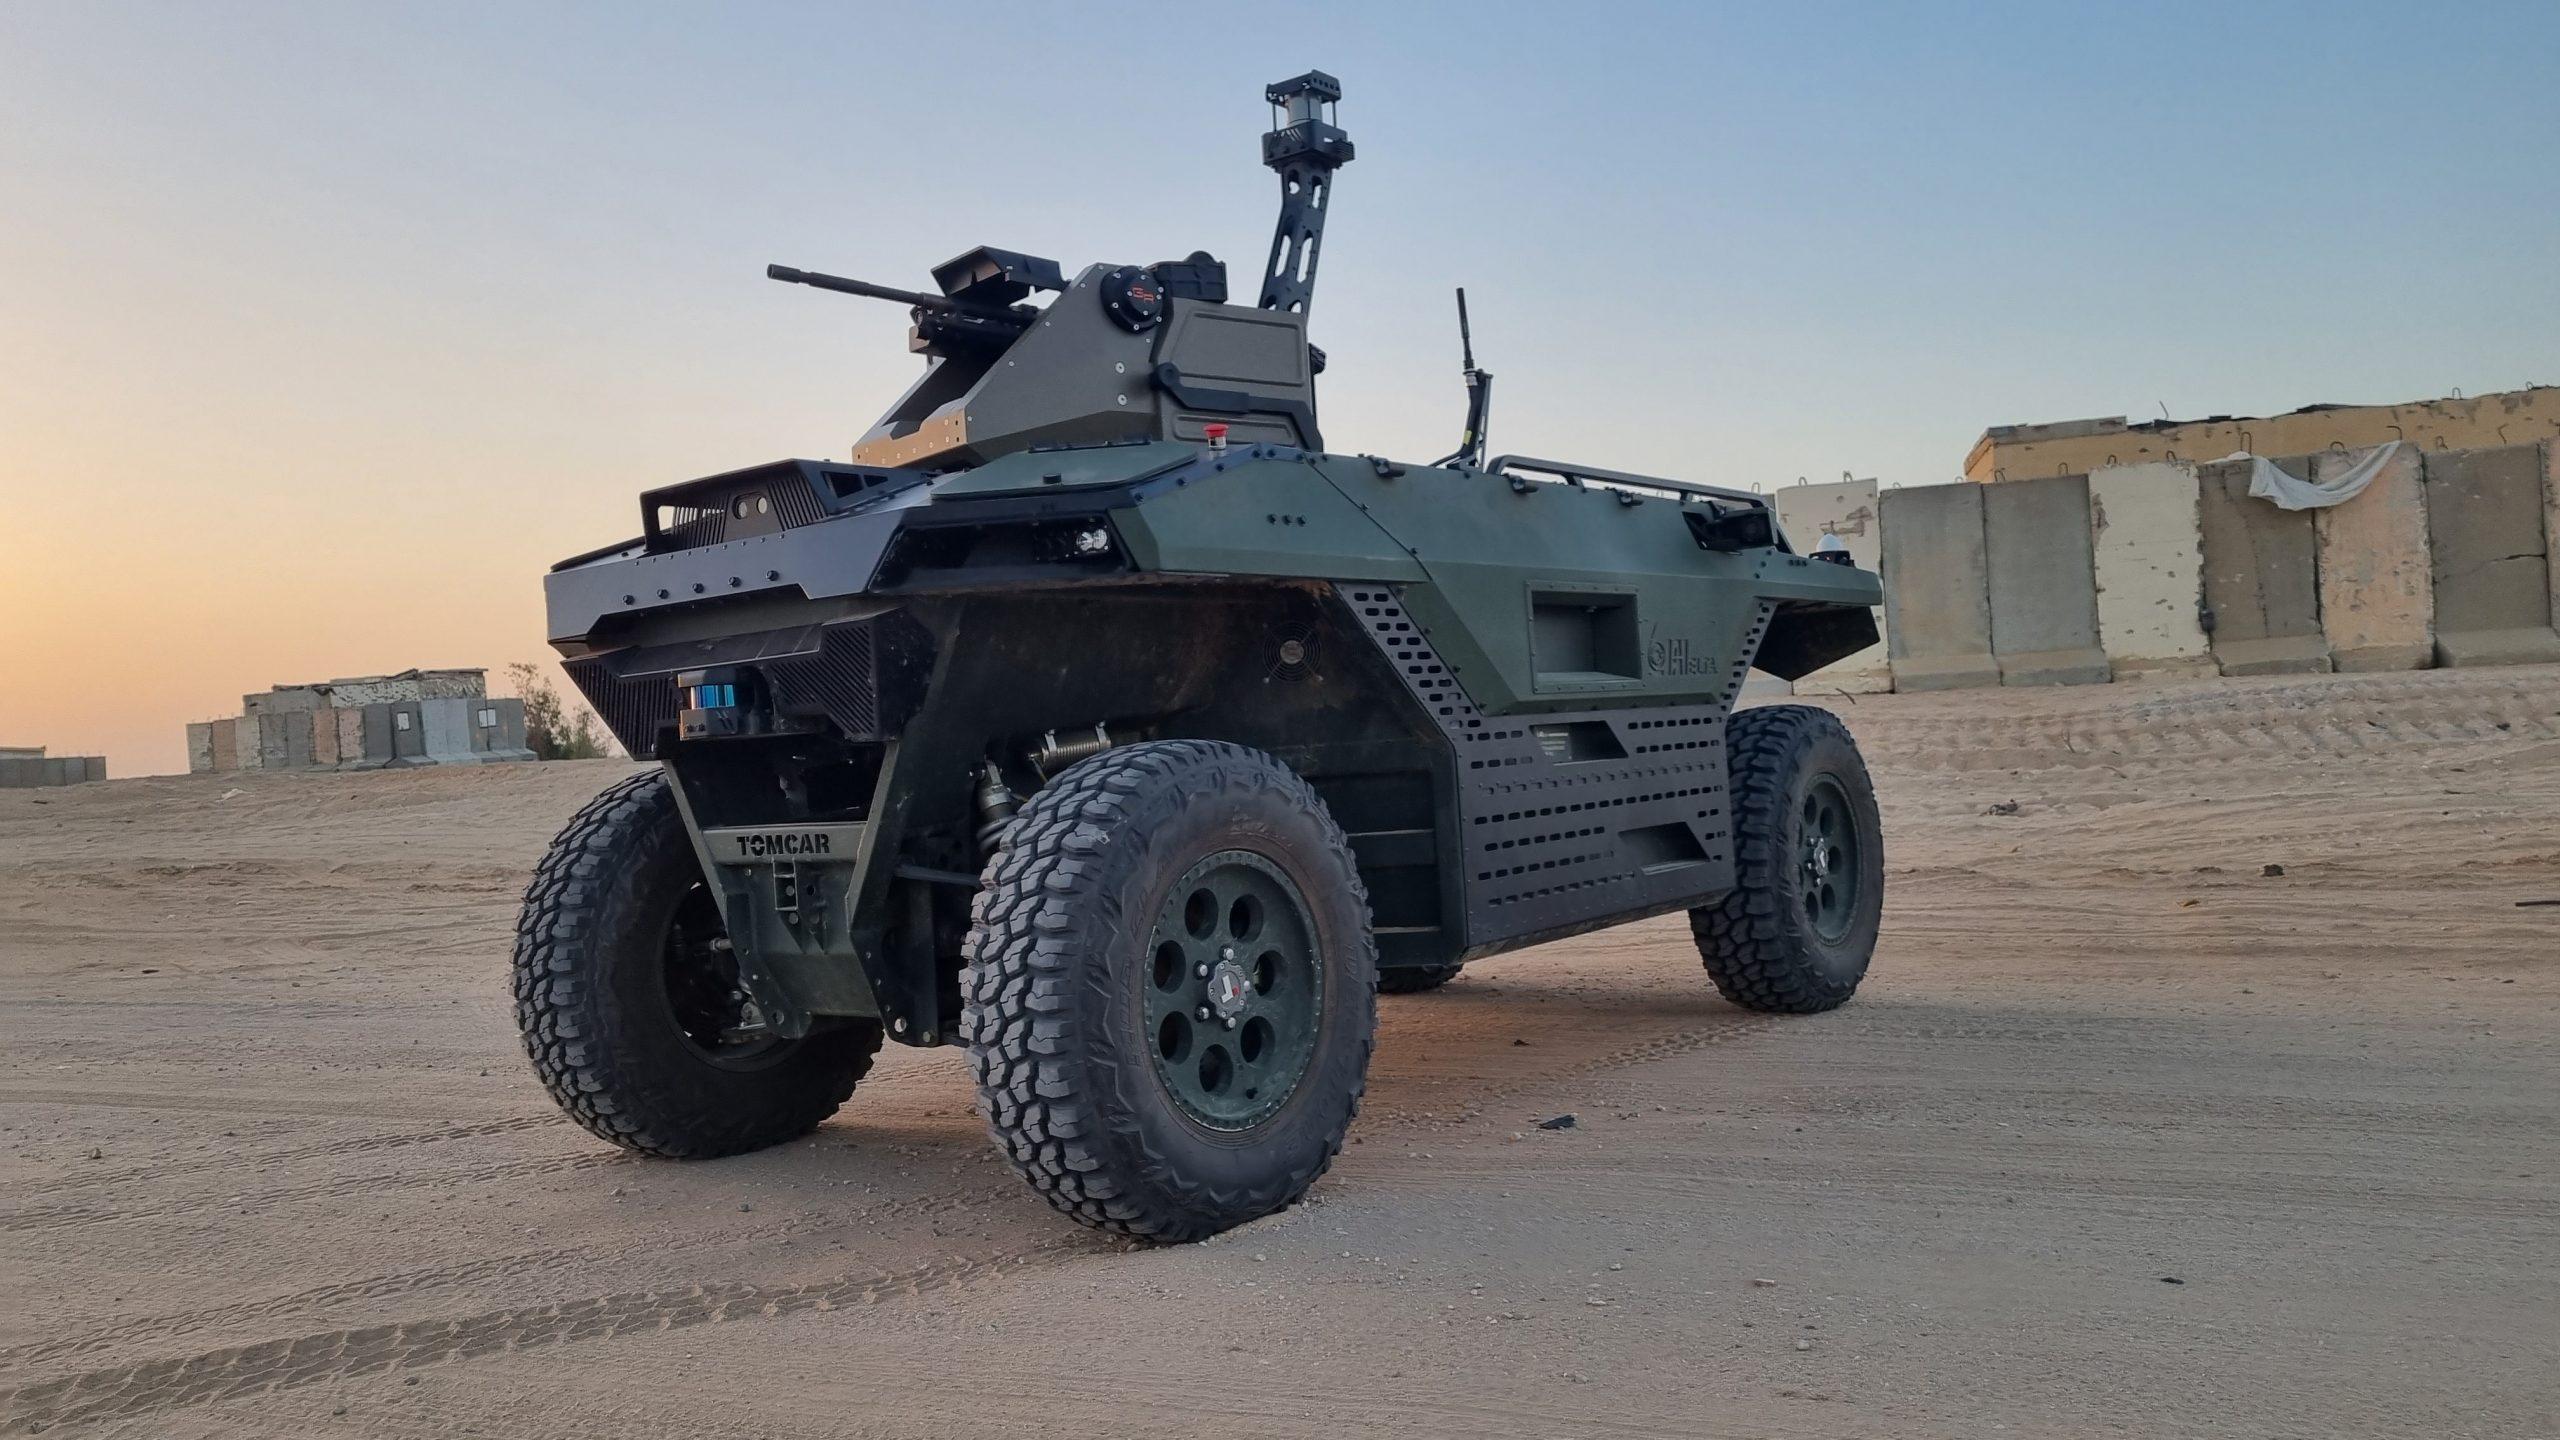 Israel Aerospace Industries (IAI) will unveil the newest variant of the REX MK II unmanned land platform at DSEI